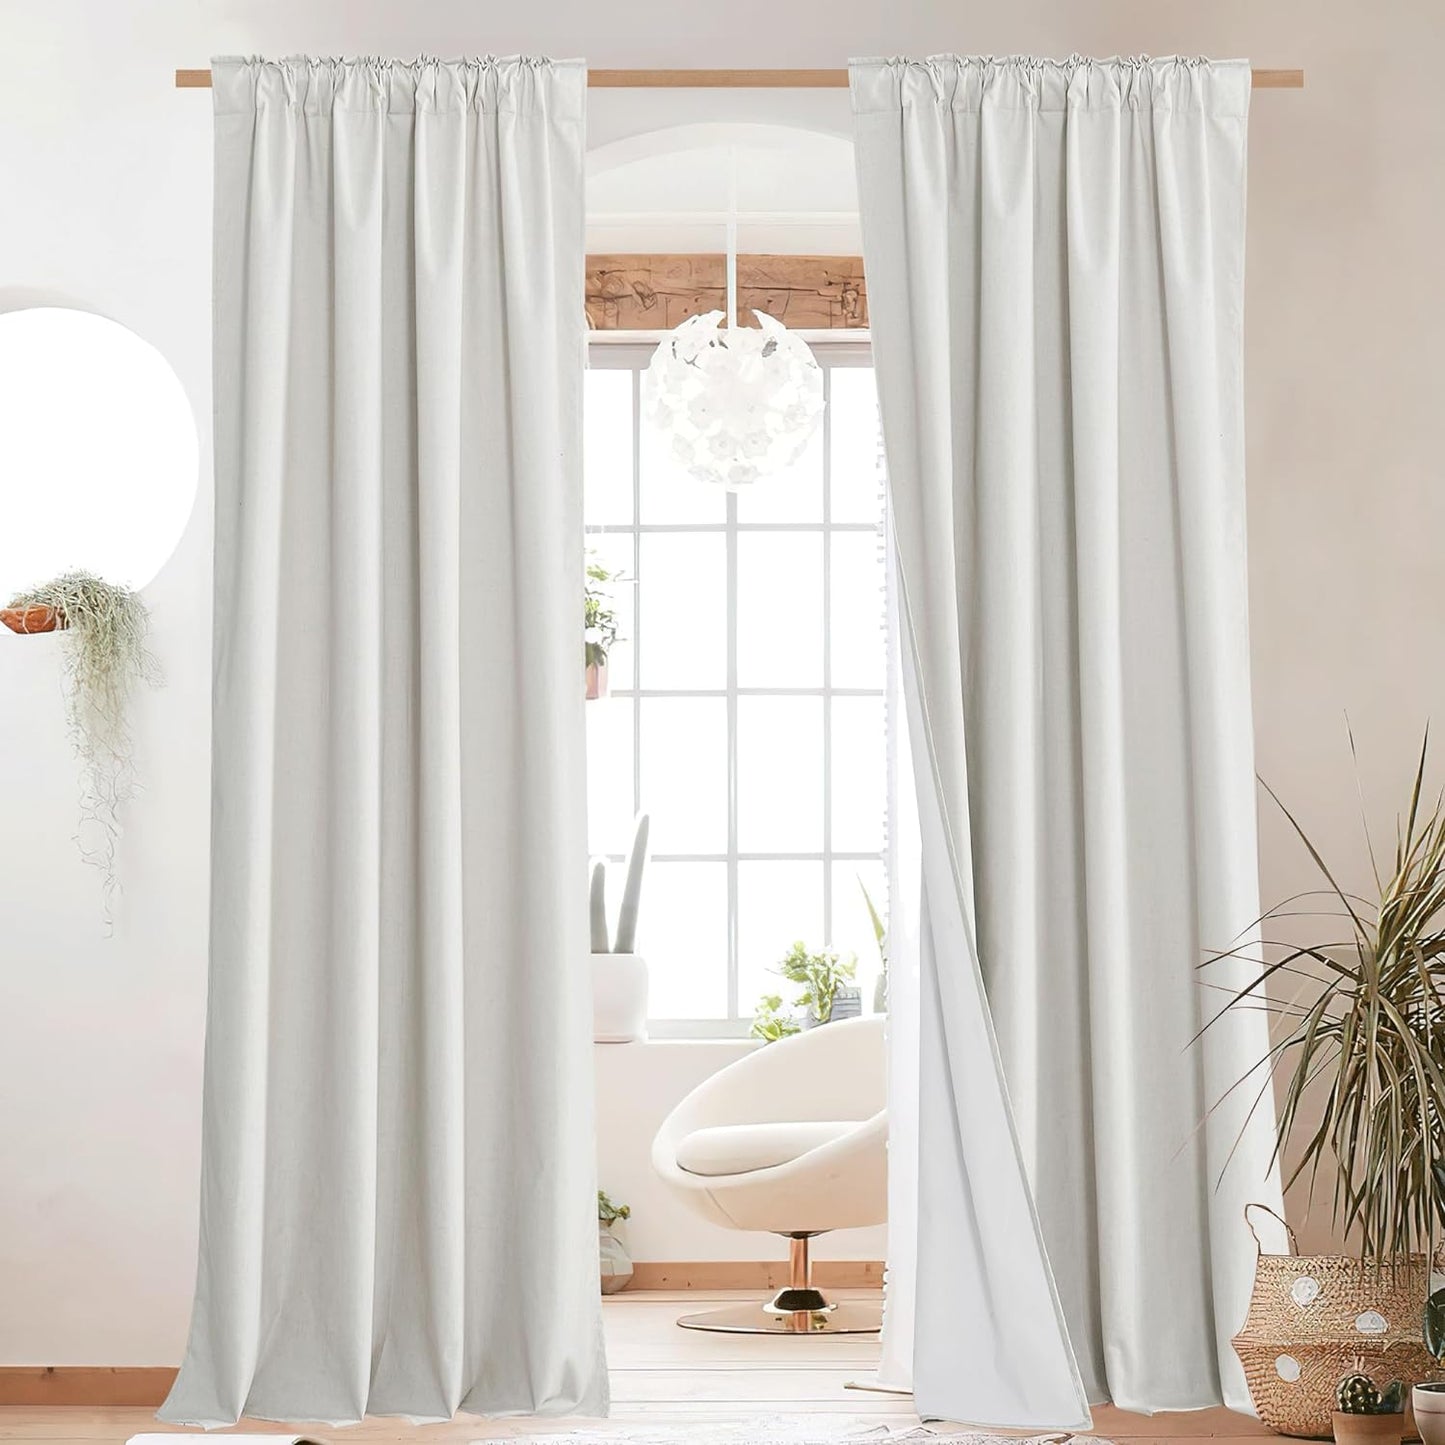 NICETOWN 100% Blackout Linen Curtains for Living Room with Thermal Insulated White Liner, Ivory, 52" Wide, 2 Panels, 84" Long Drapes, Back Tab Retro Linen Curtains Vertical Drapes Privacy for Bedroom  NICETOWN   